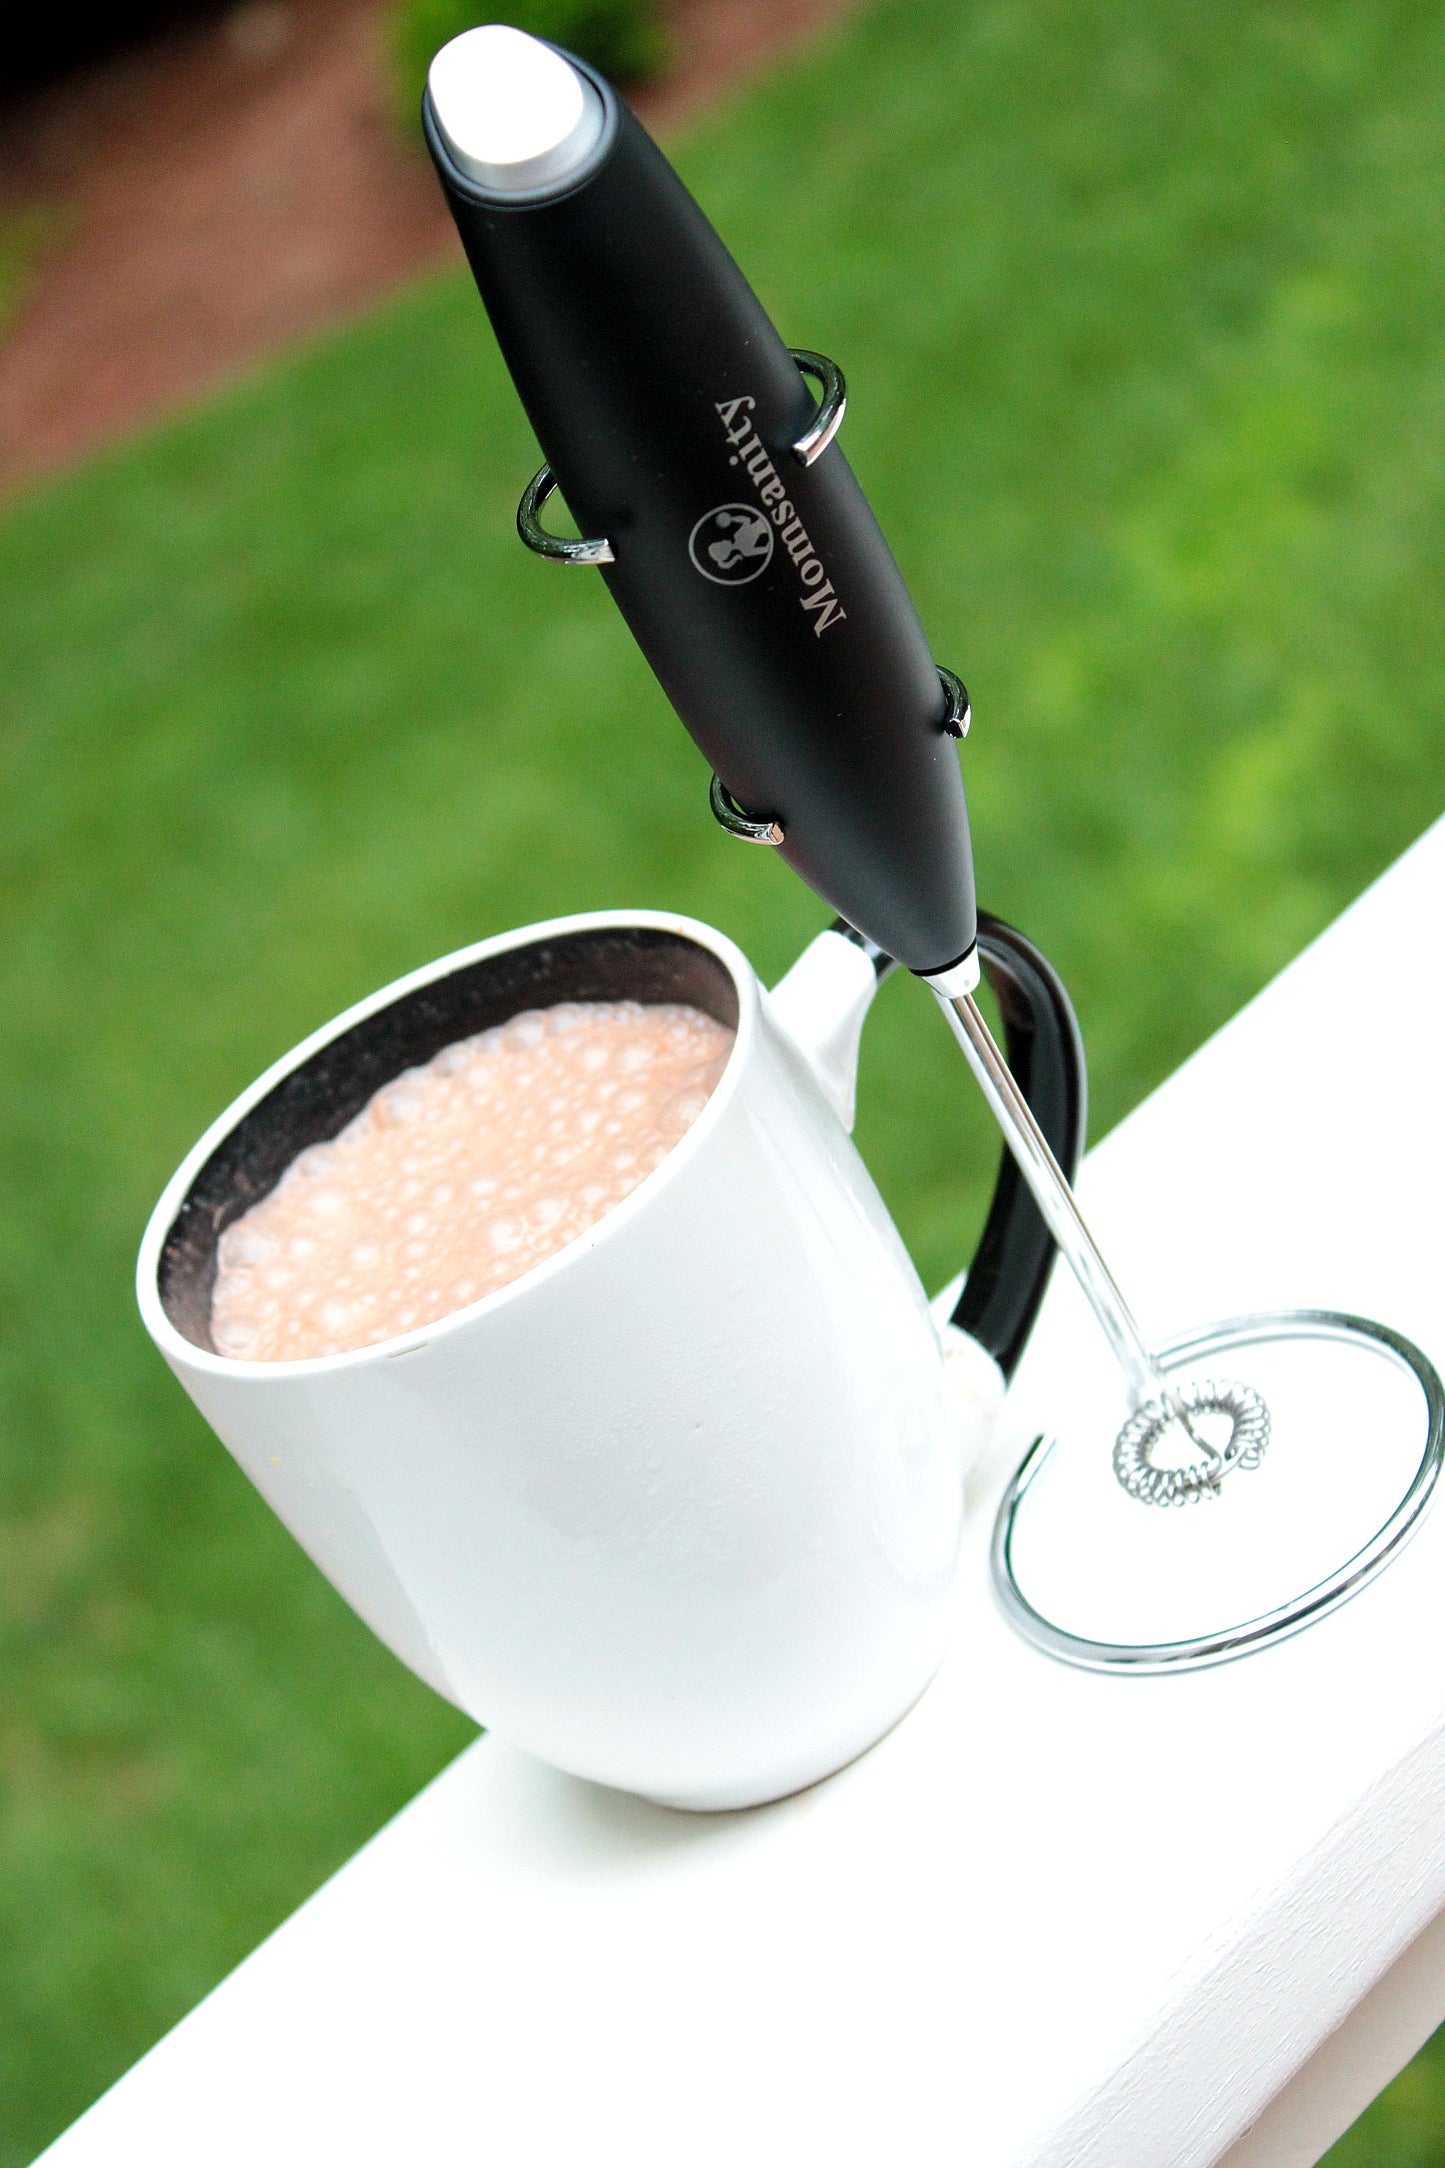 Handheld Power Frother and Stand